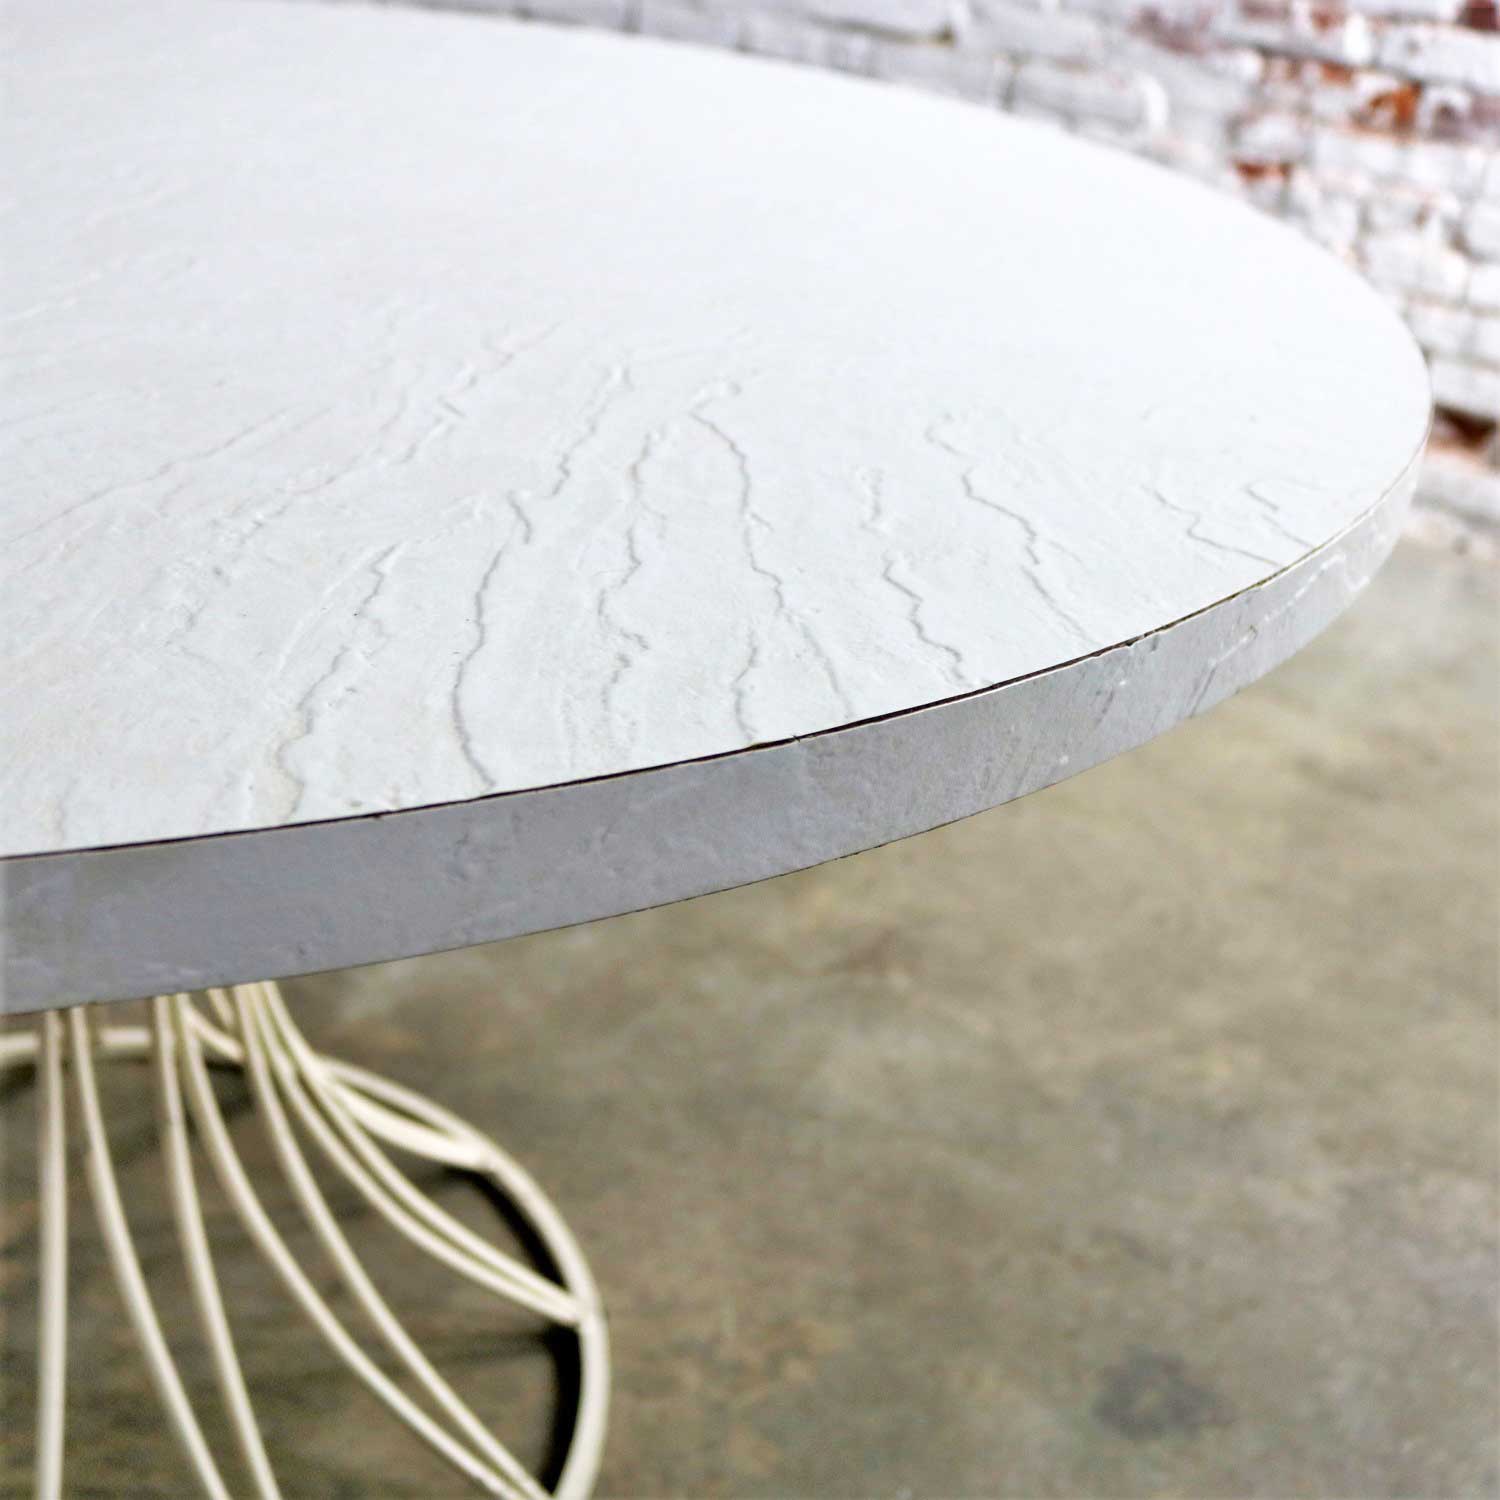 MCM Round Wrought Iron and Laminate Patio Dining Table by Max Stout for Blacksmith Shop Collection